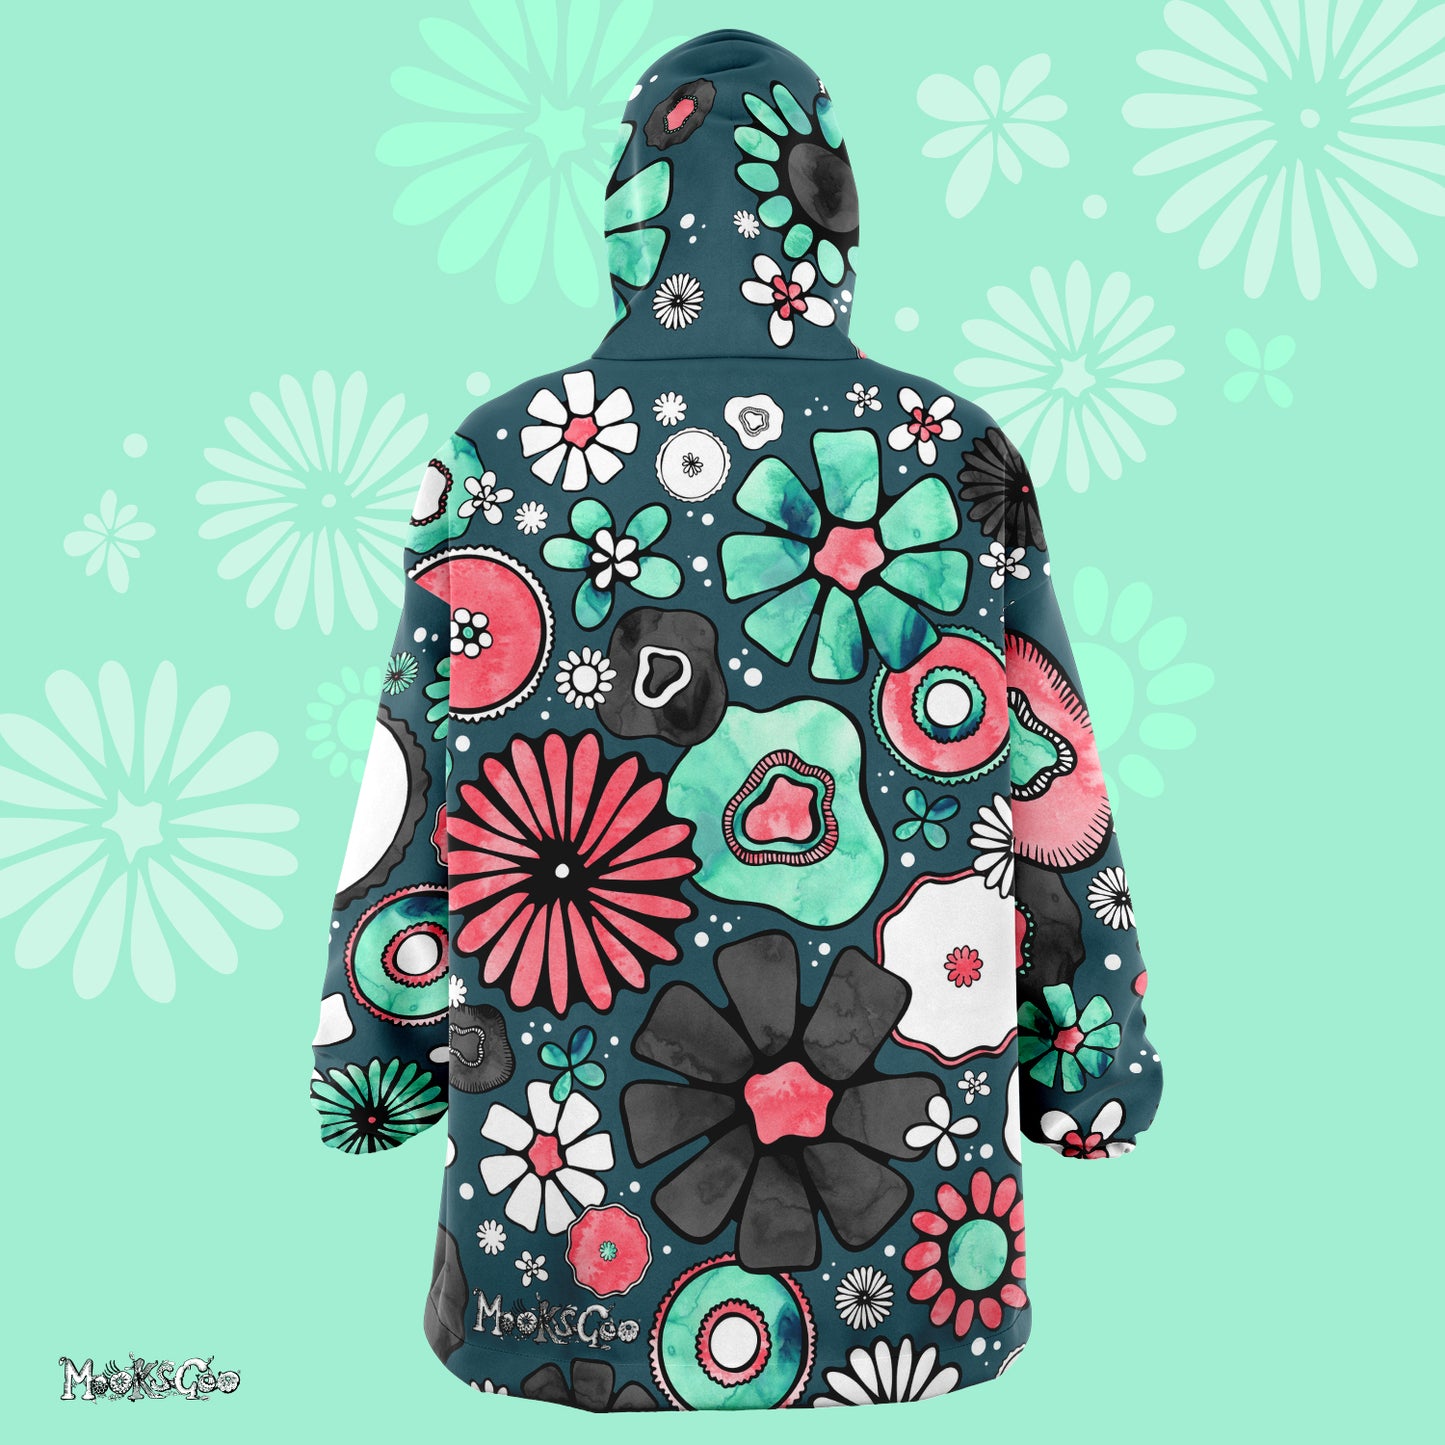 Soft microfibre fleece and minky oversized hoodie for winter clothing to keep warm, designed with bright bold funky nature flowers with turquoise and coral hand drawn flowers by MooksGoo